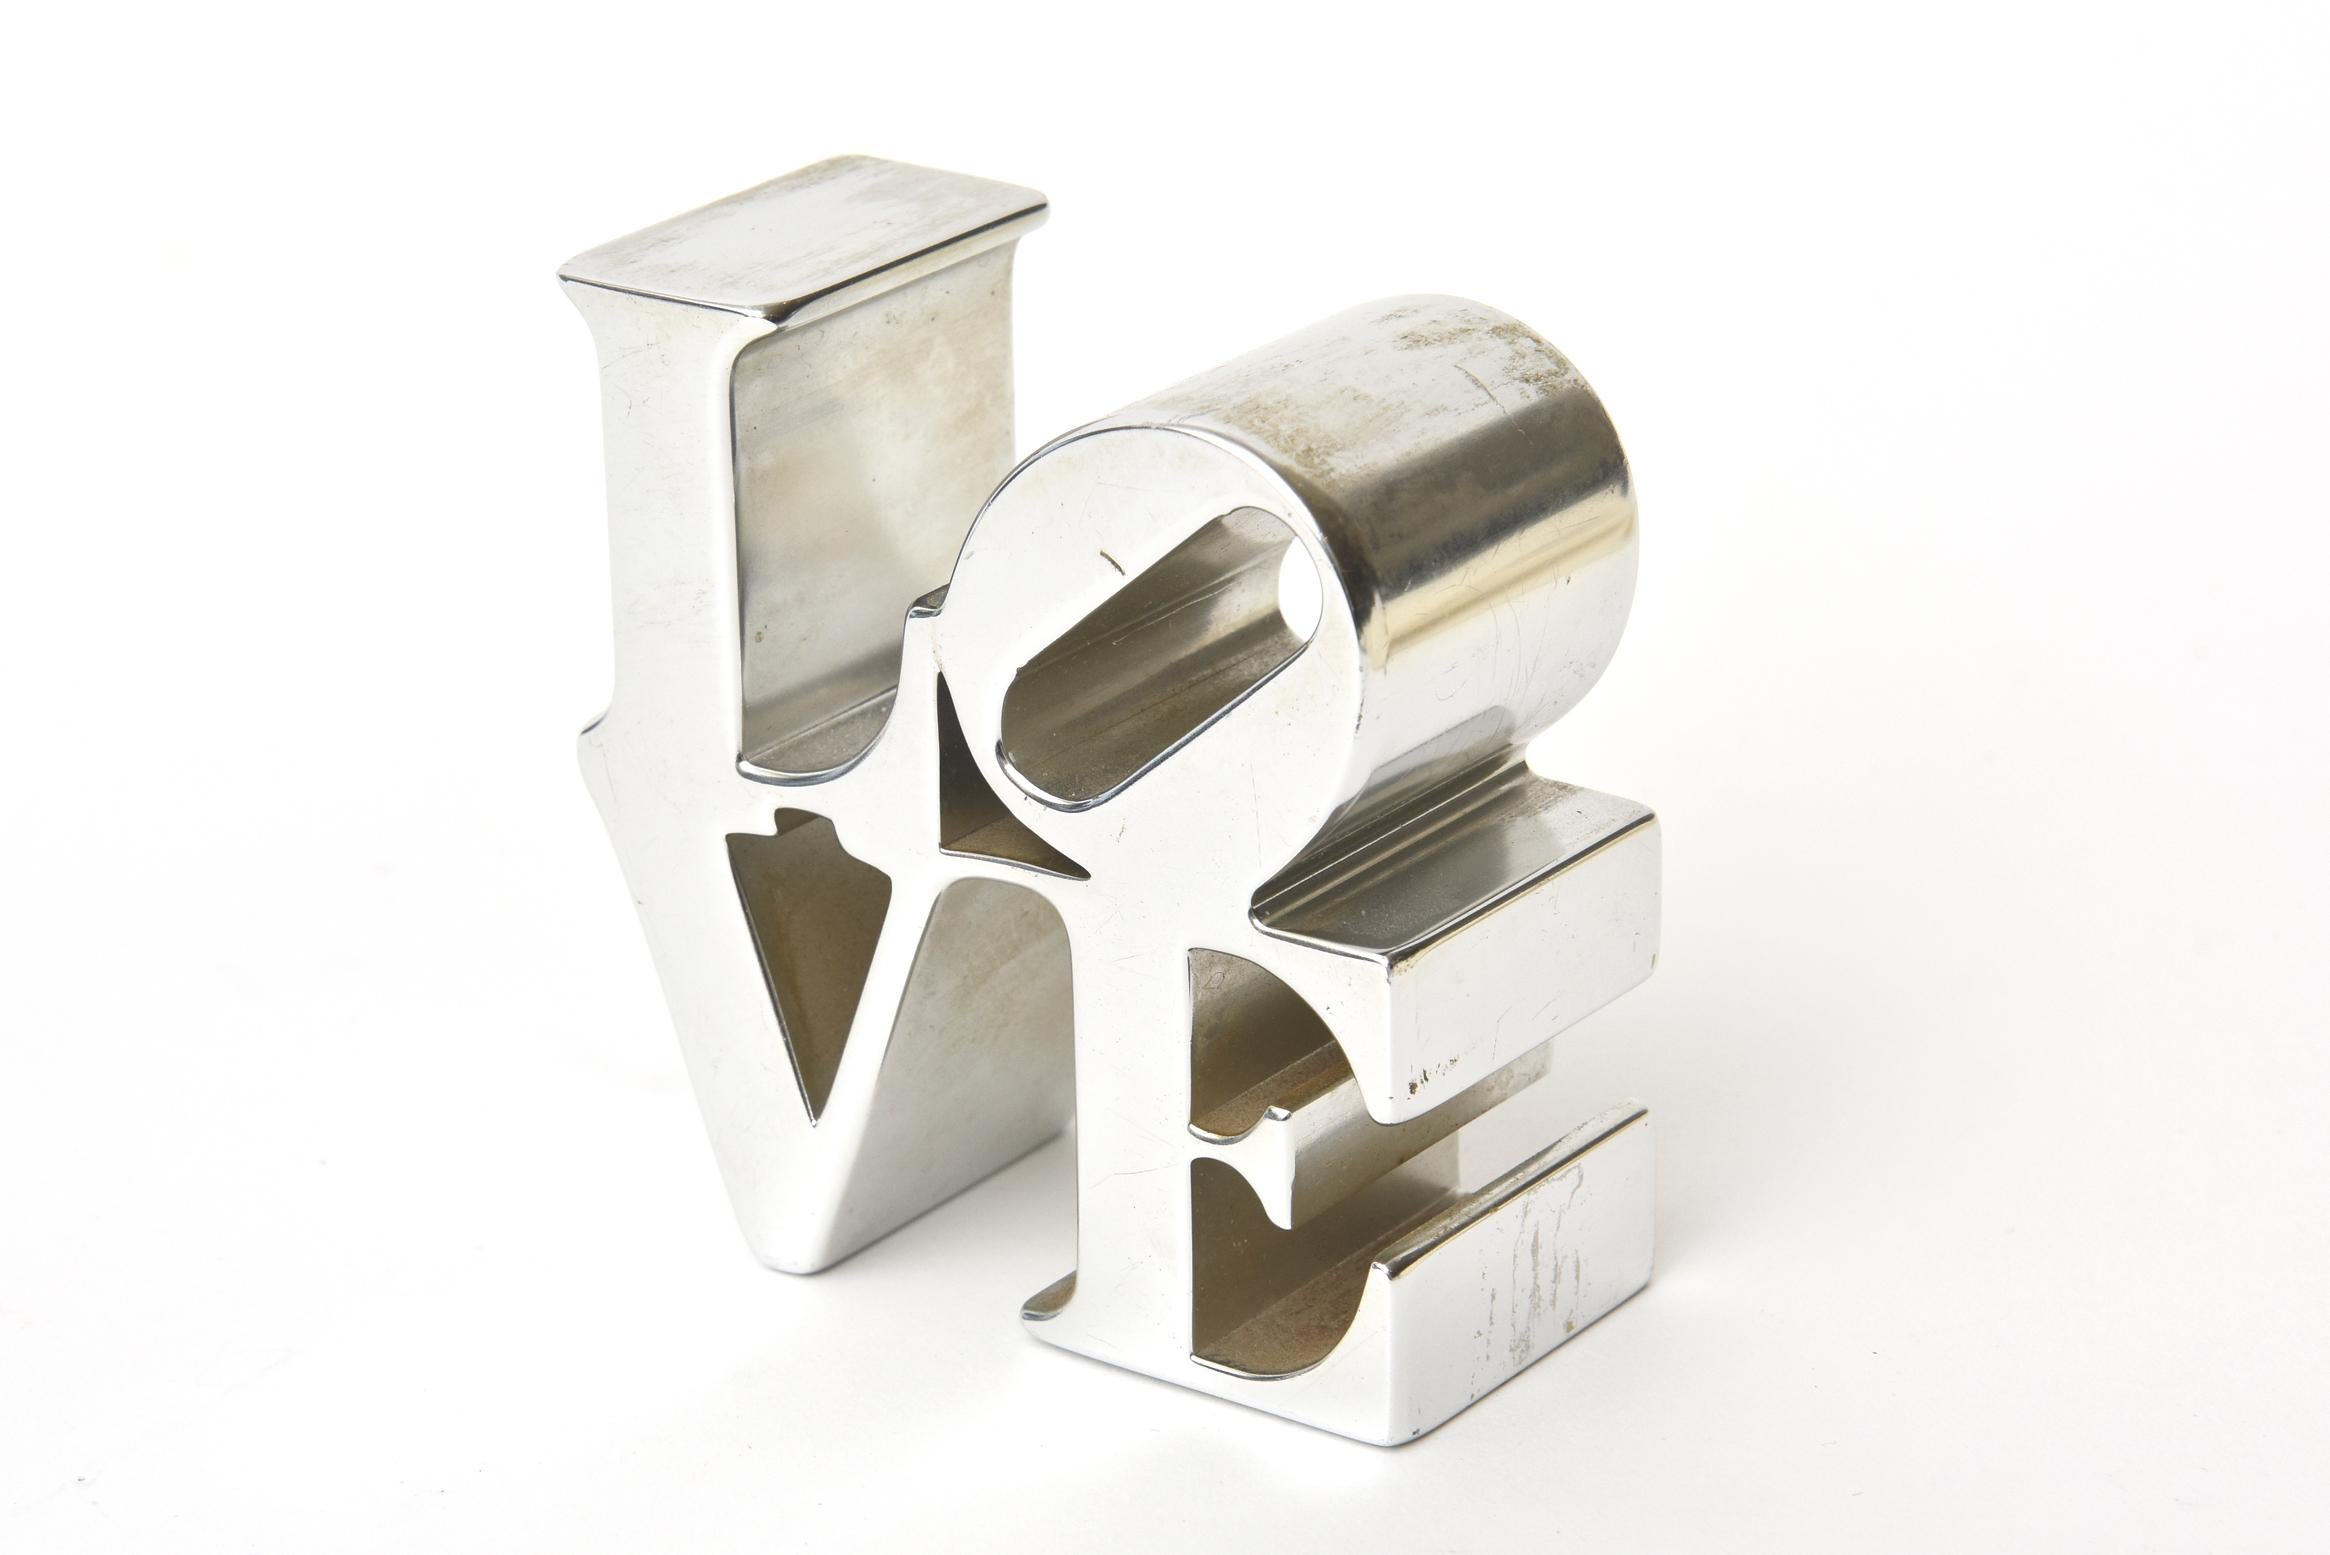 This iconic love chrome-plated aluminum Robert Indiana paperweight /sculpture is from the 1970s. The artist's original love painting in the 1970s put him on the map of highly collectable artists. It says it all. In this world of non communication